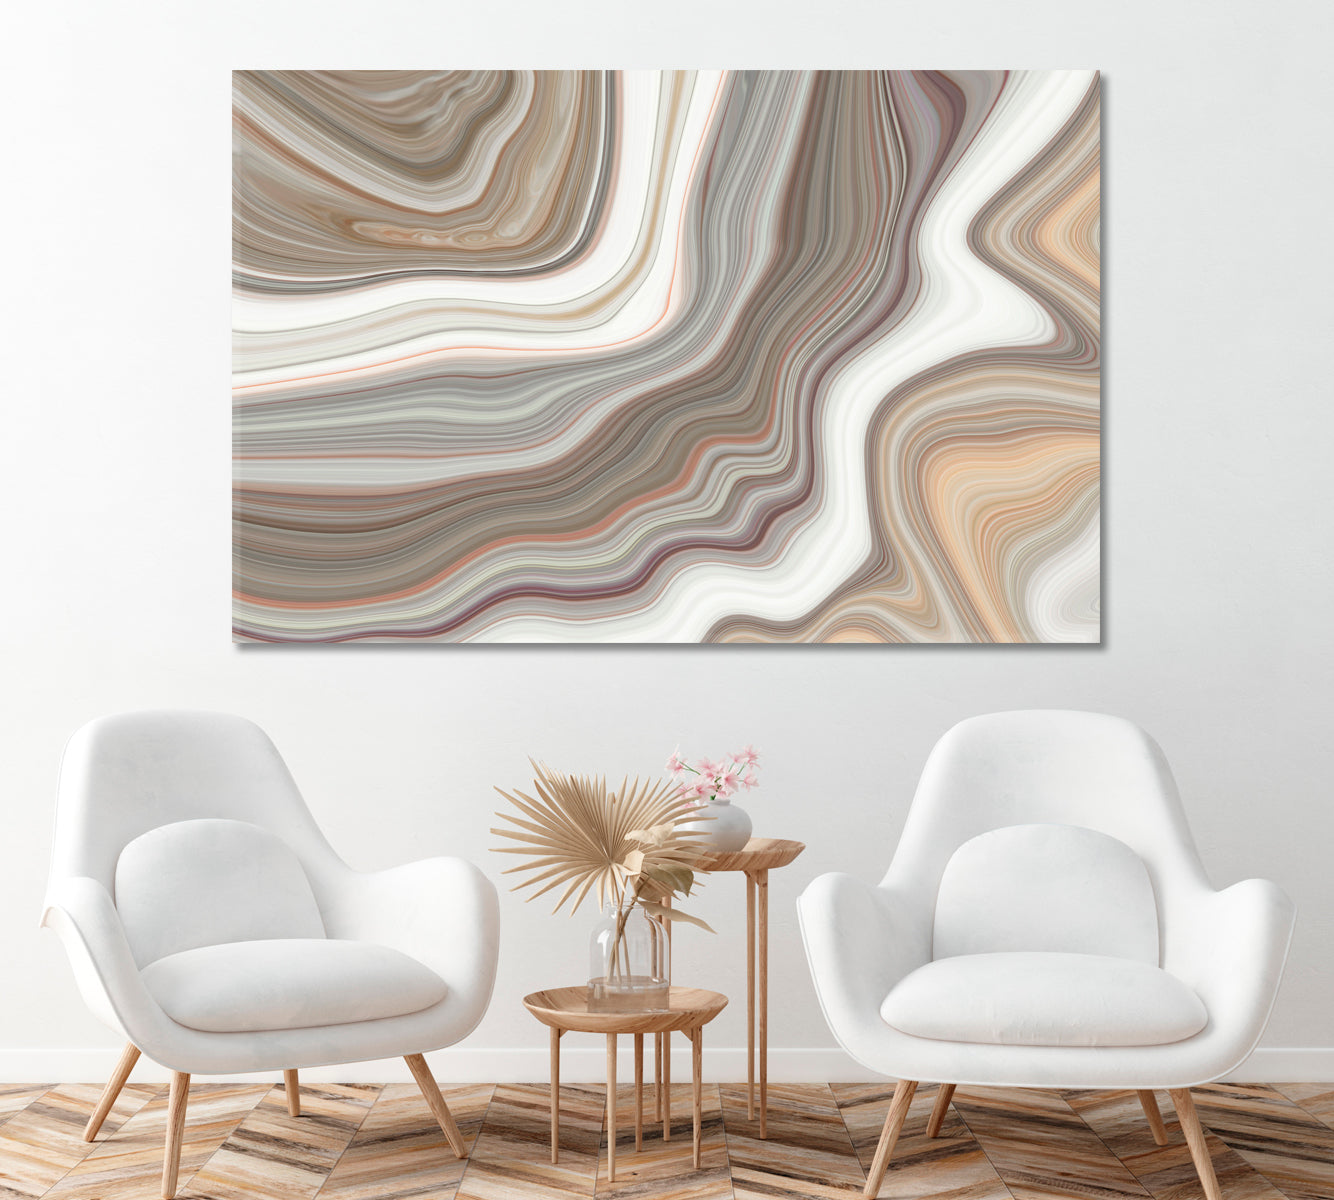 Beige Marble Pattern Canvas Print ArtLexy 1 Panel 24"x16" inches 